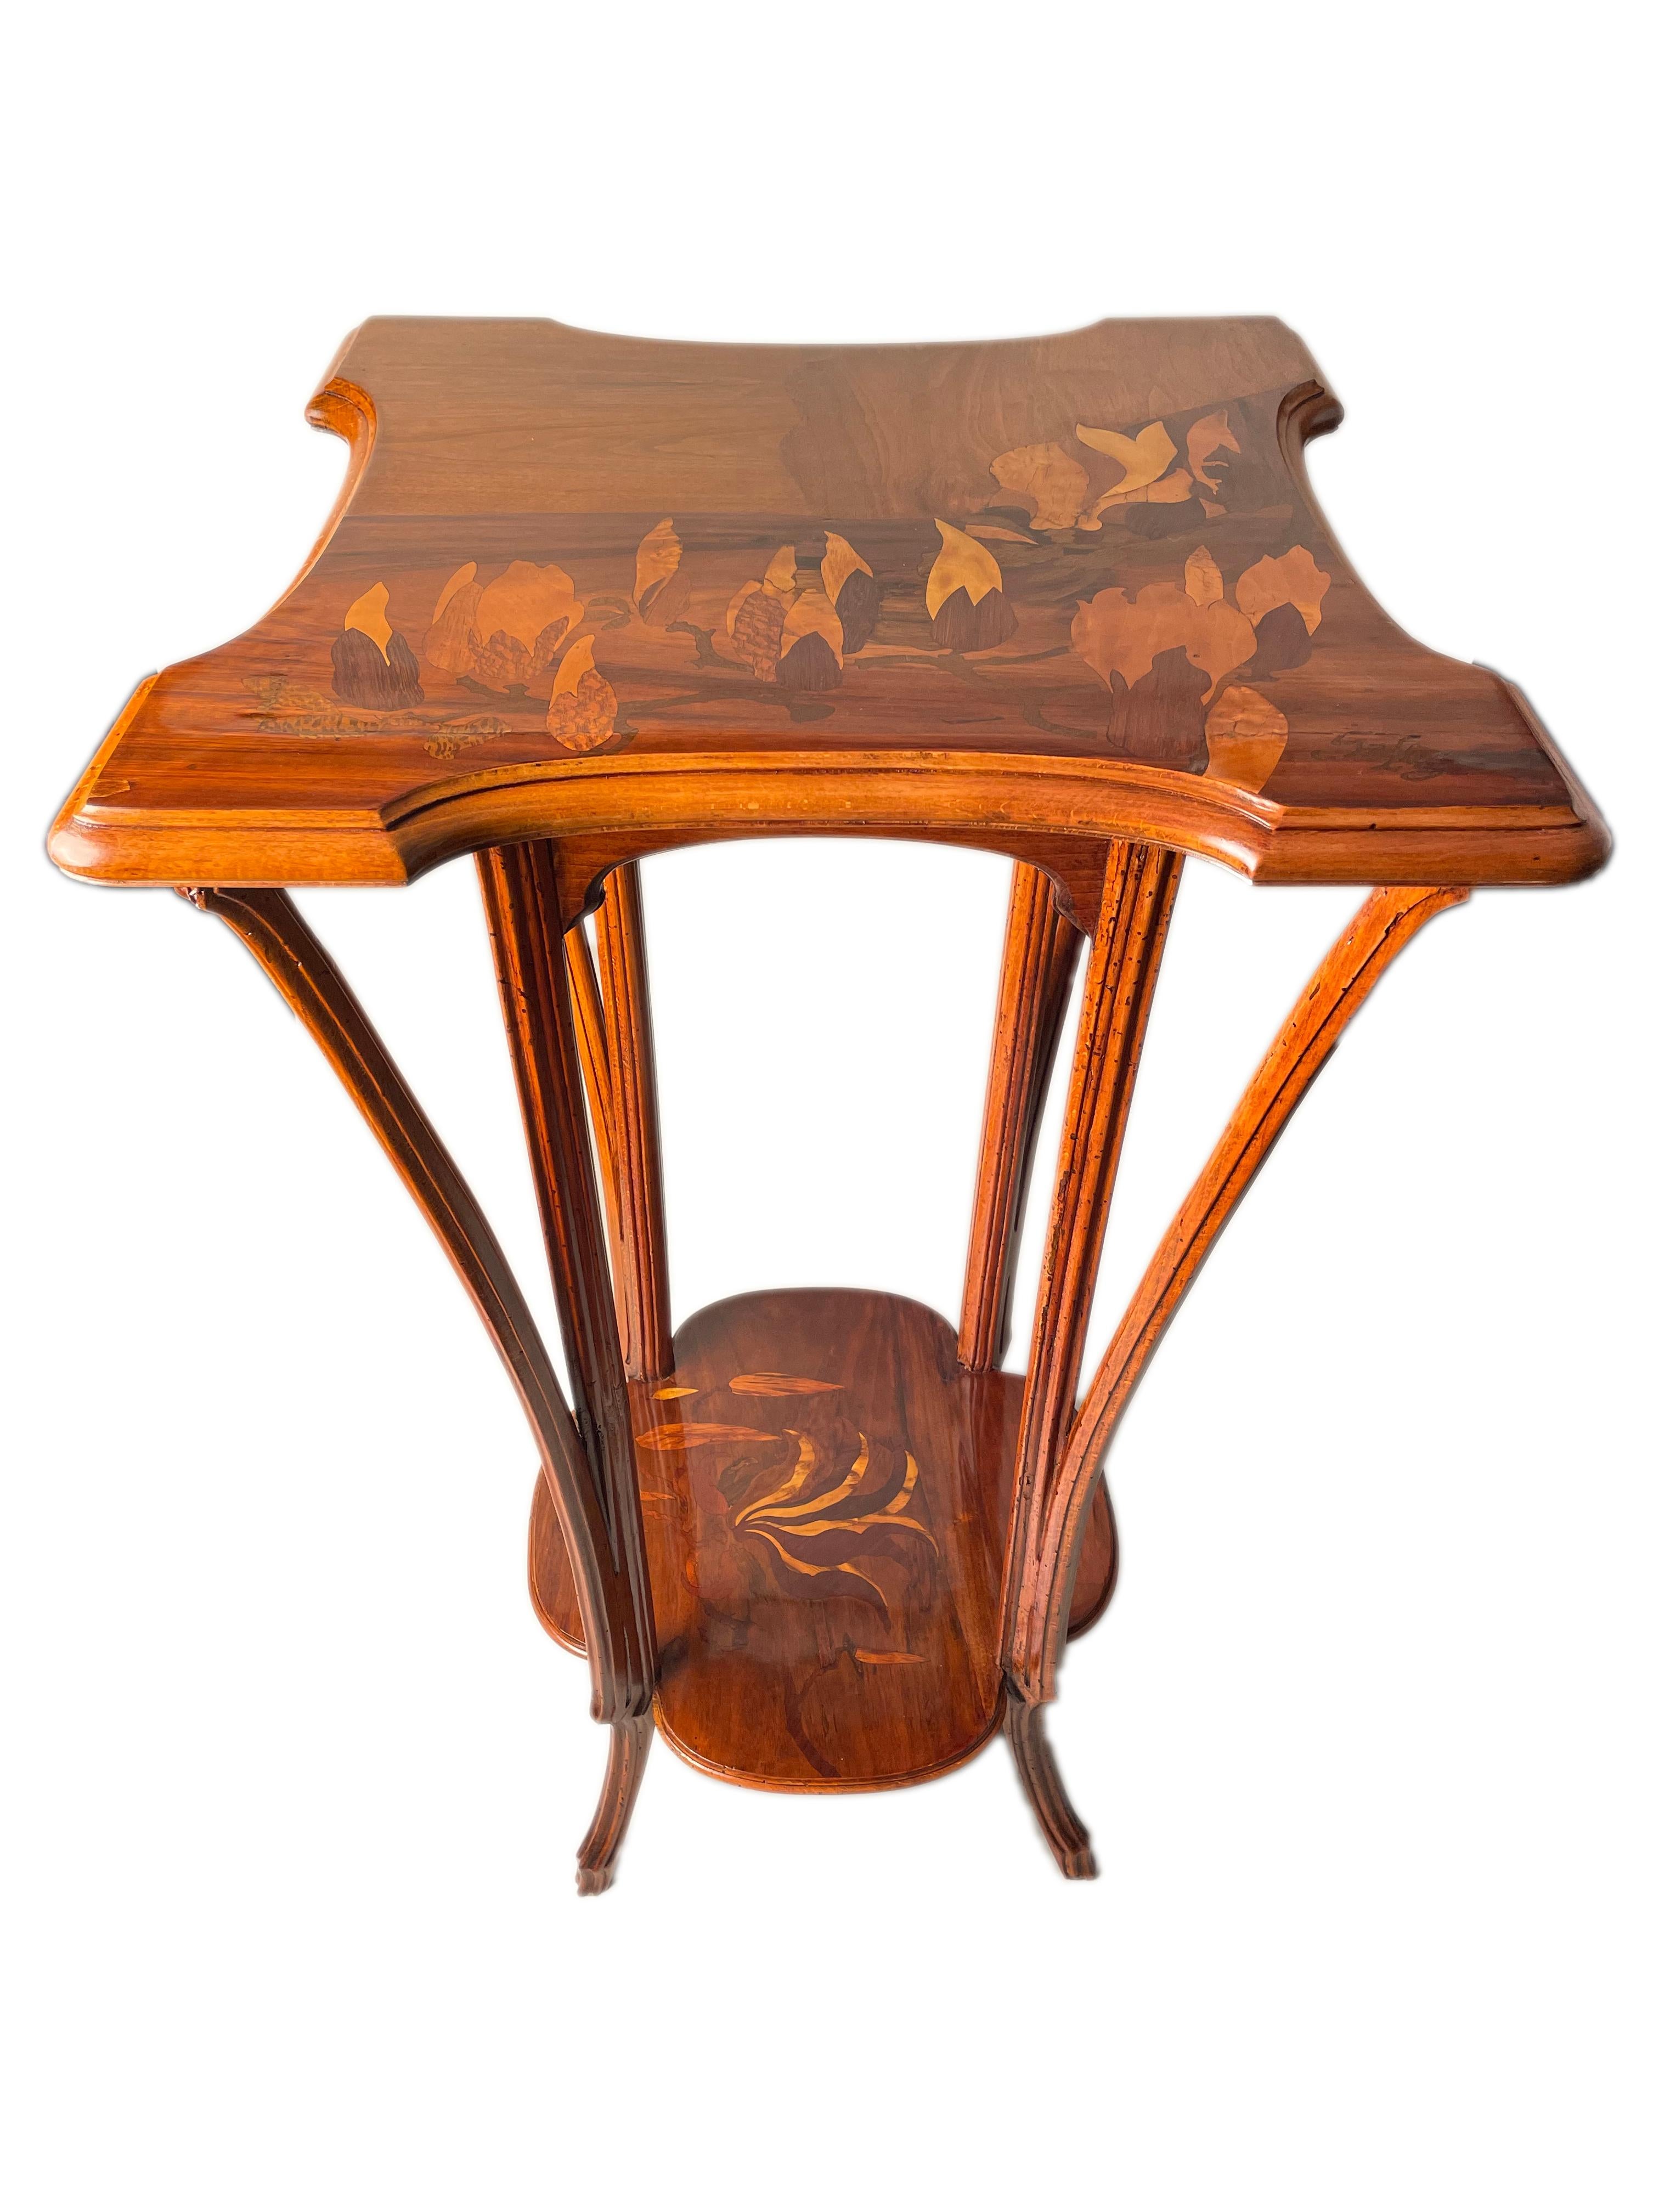 An early 20th century French Art Nouveau carved fruitwood & marquetry pedestal by, Emile Gallé featuring inlaid fruitwood marquetry depicting magnolias on the upper and a flowering magnolia on the lower with carved legs and further signed in inlay